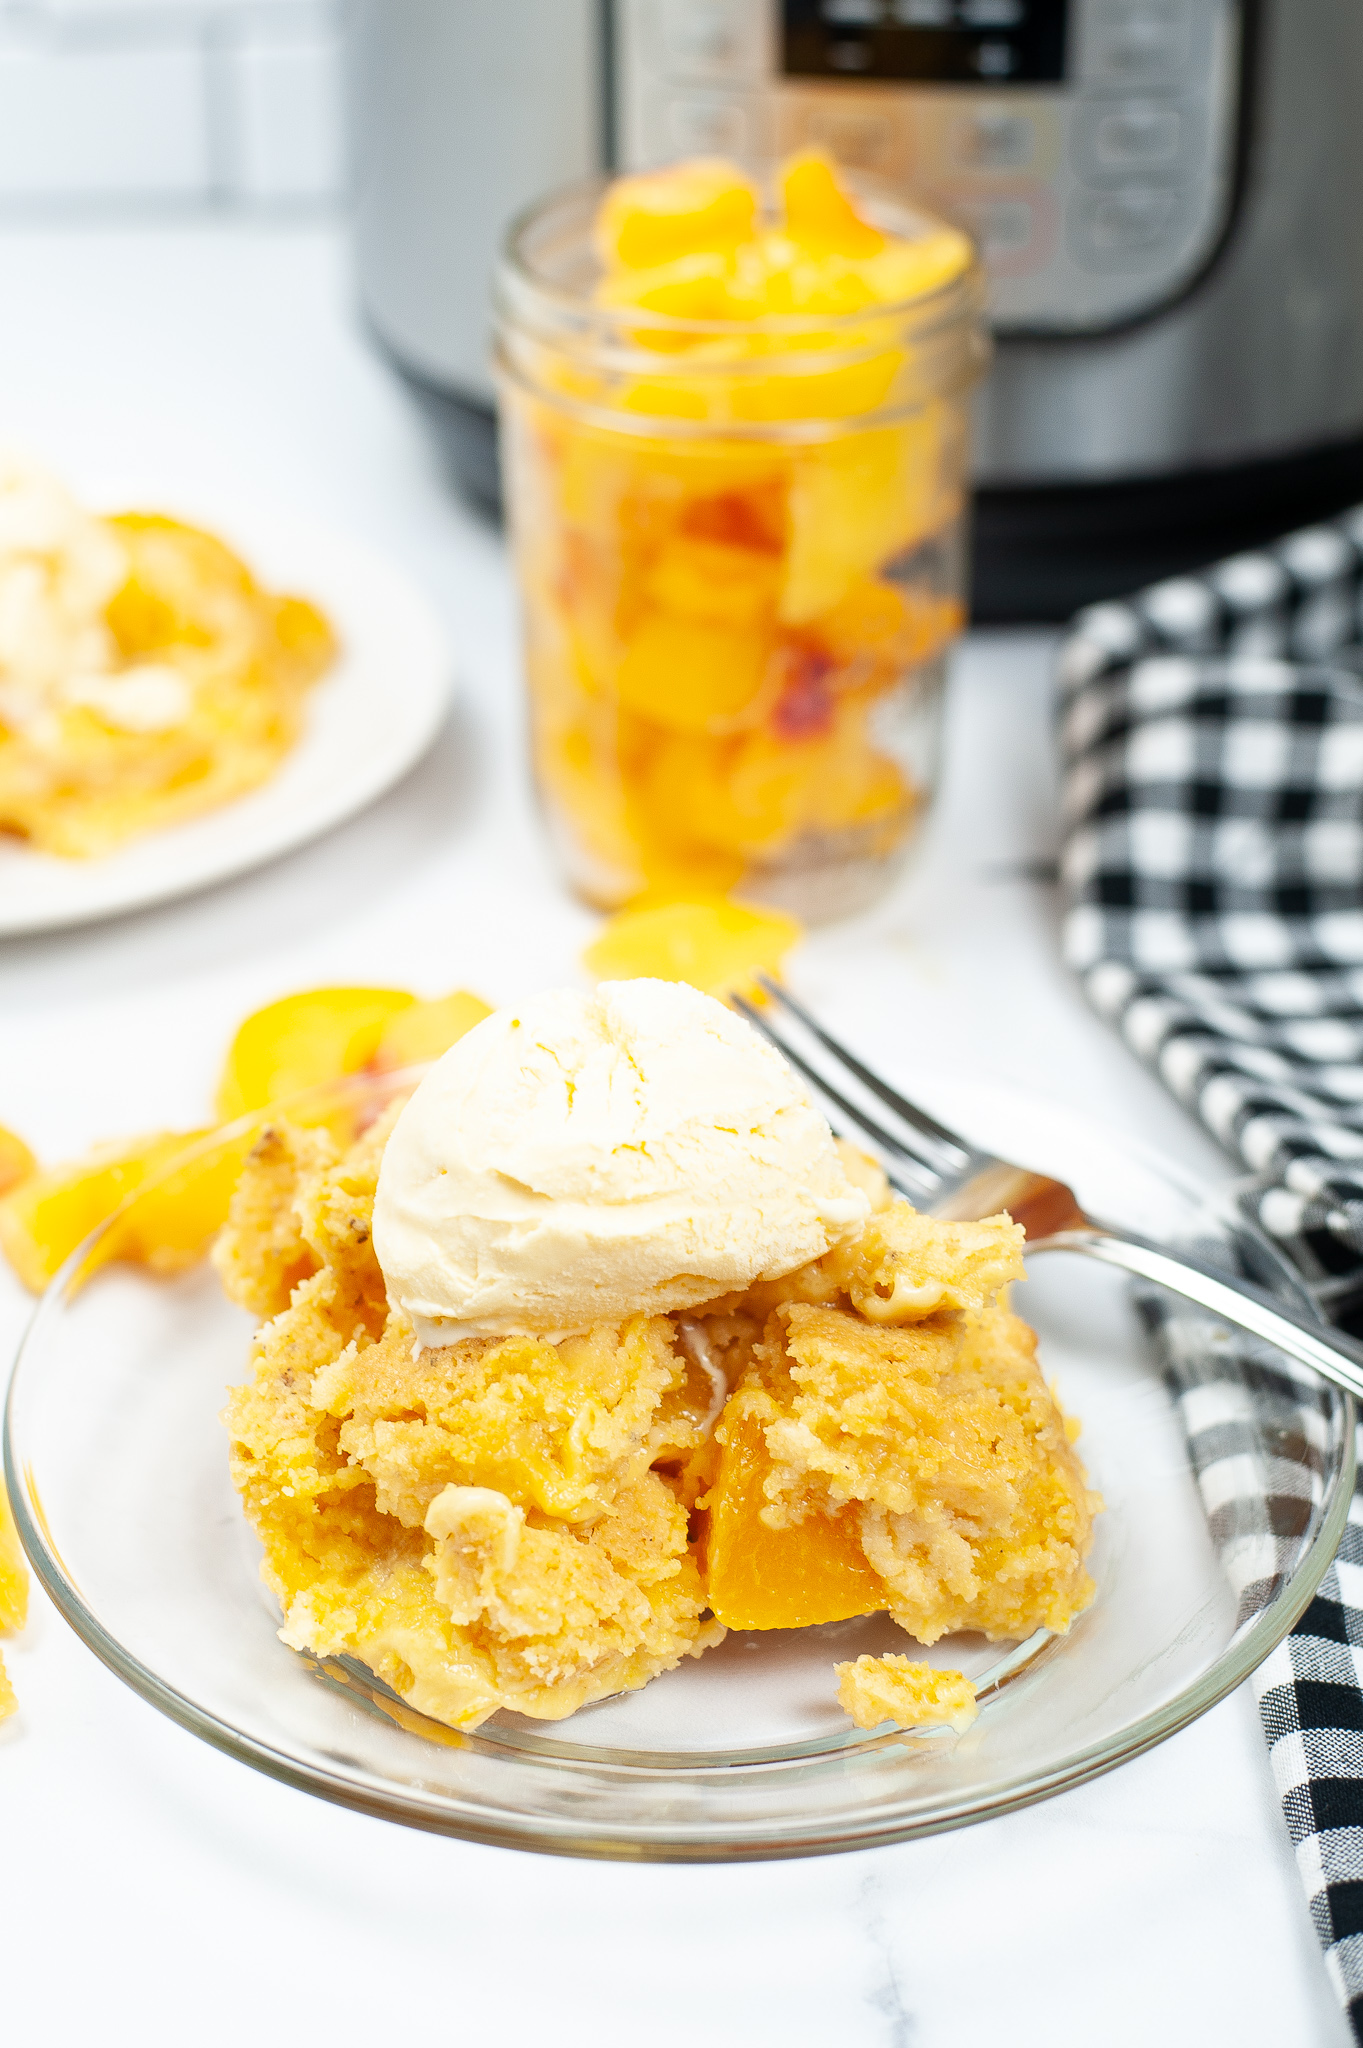 Peach cobbler on a clear plate with ice cream and peaches in a jar in the background.